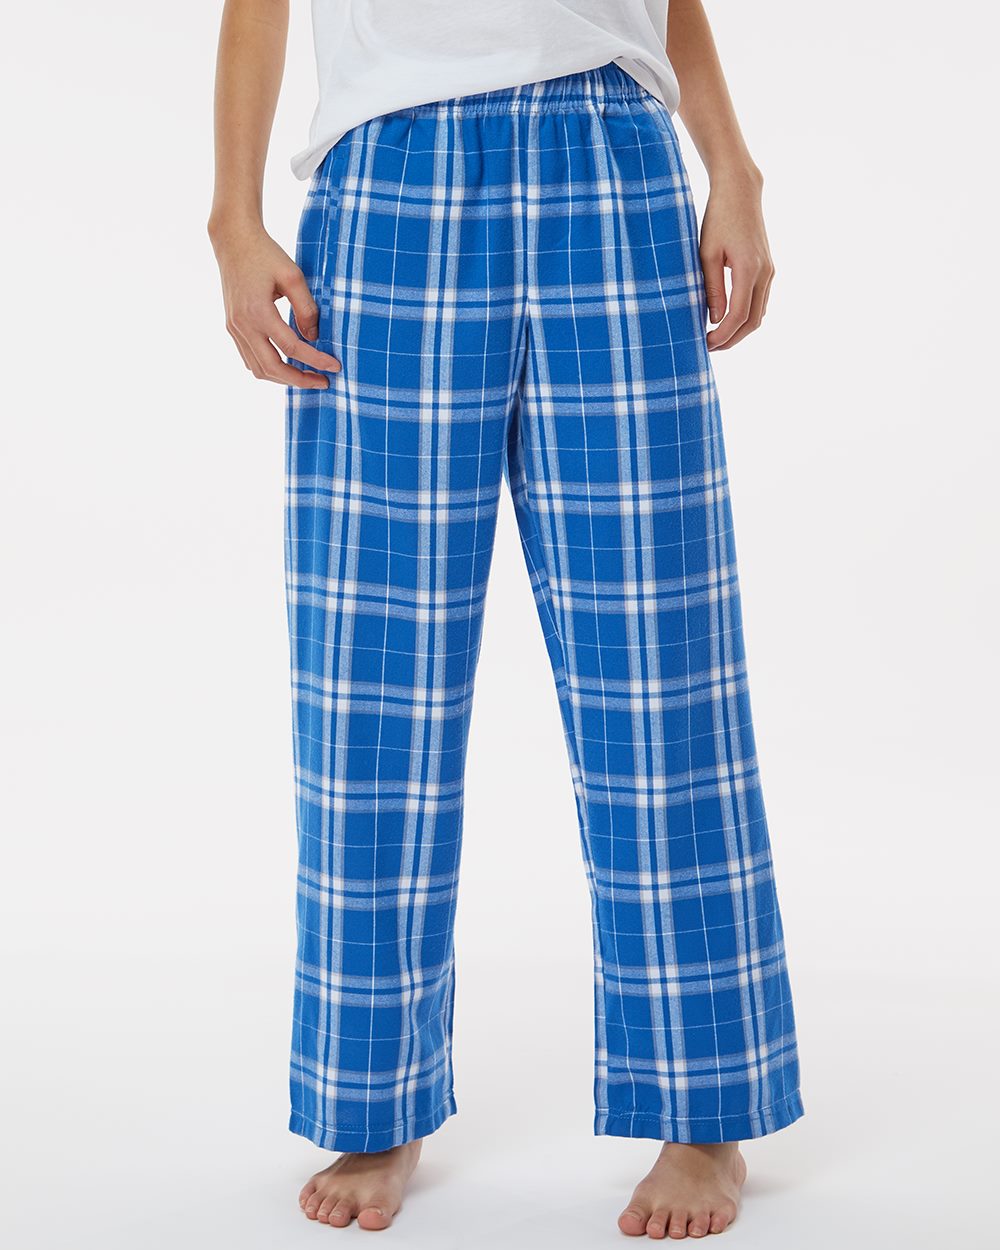 Boxercraft Youth PJ Flannel Pajama Pants in 6 Plaid Colors, Kids Sizes for  Boys & Girls, Choice of 15 Sports on Leg - Pajamas & Lounge Pants